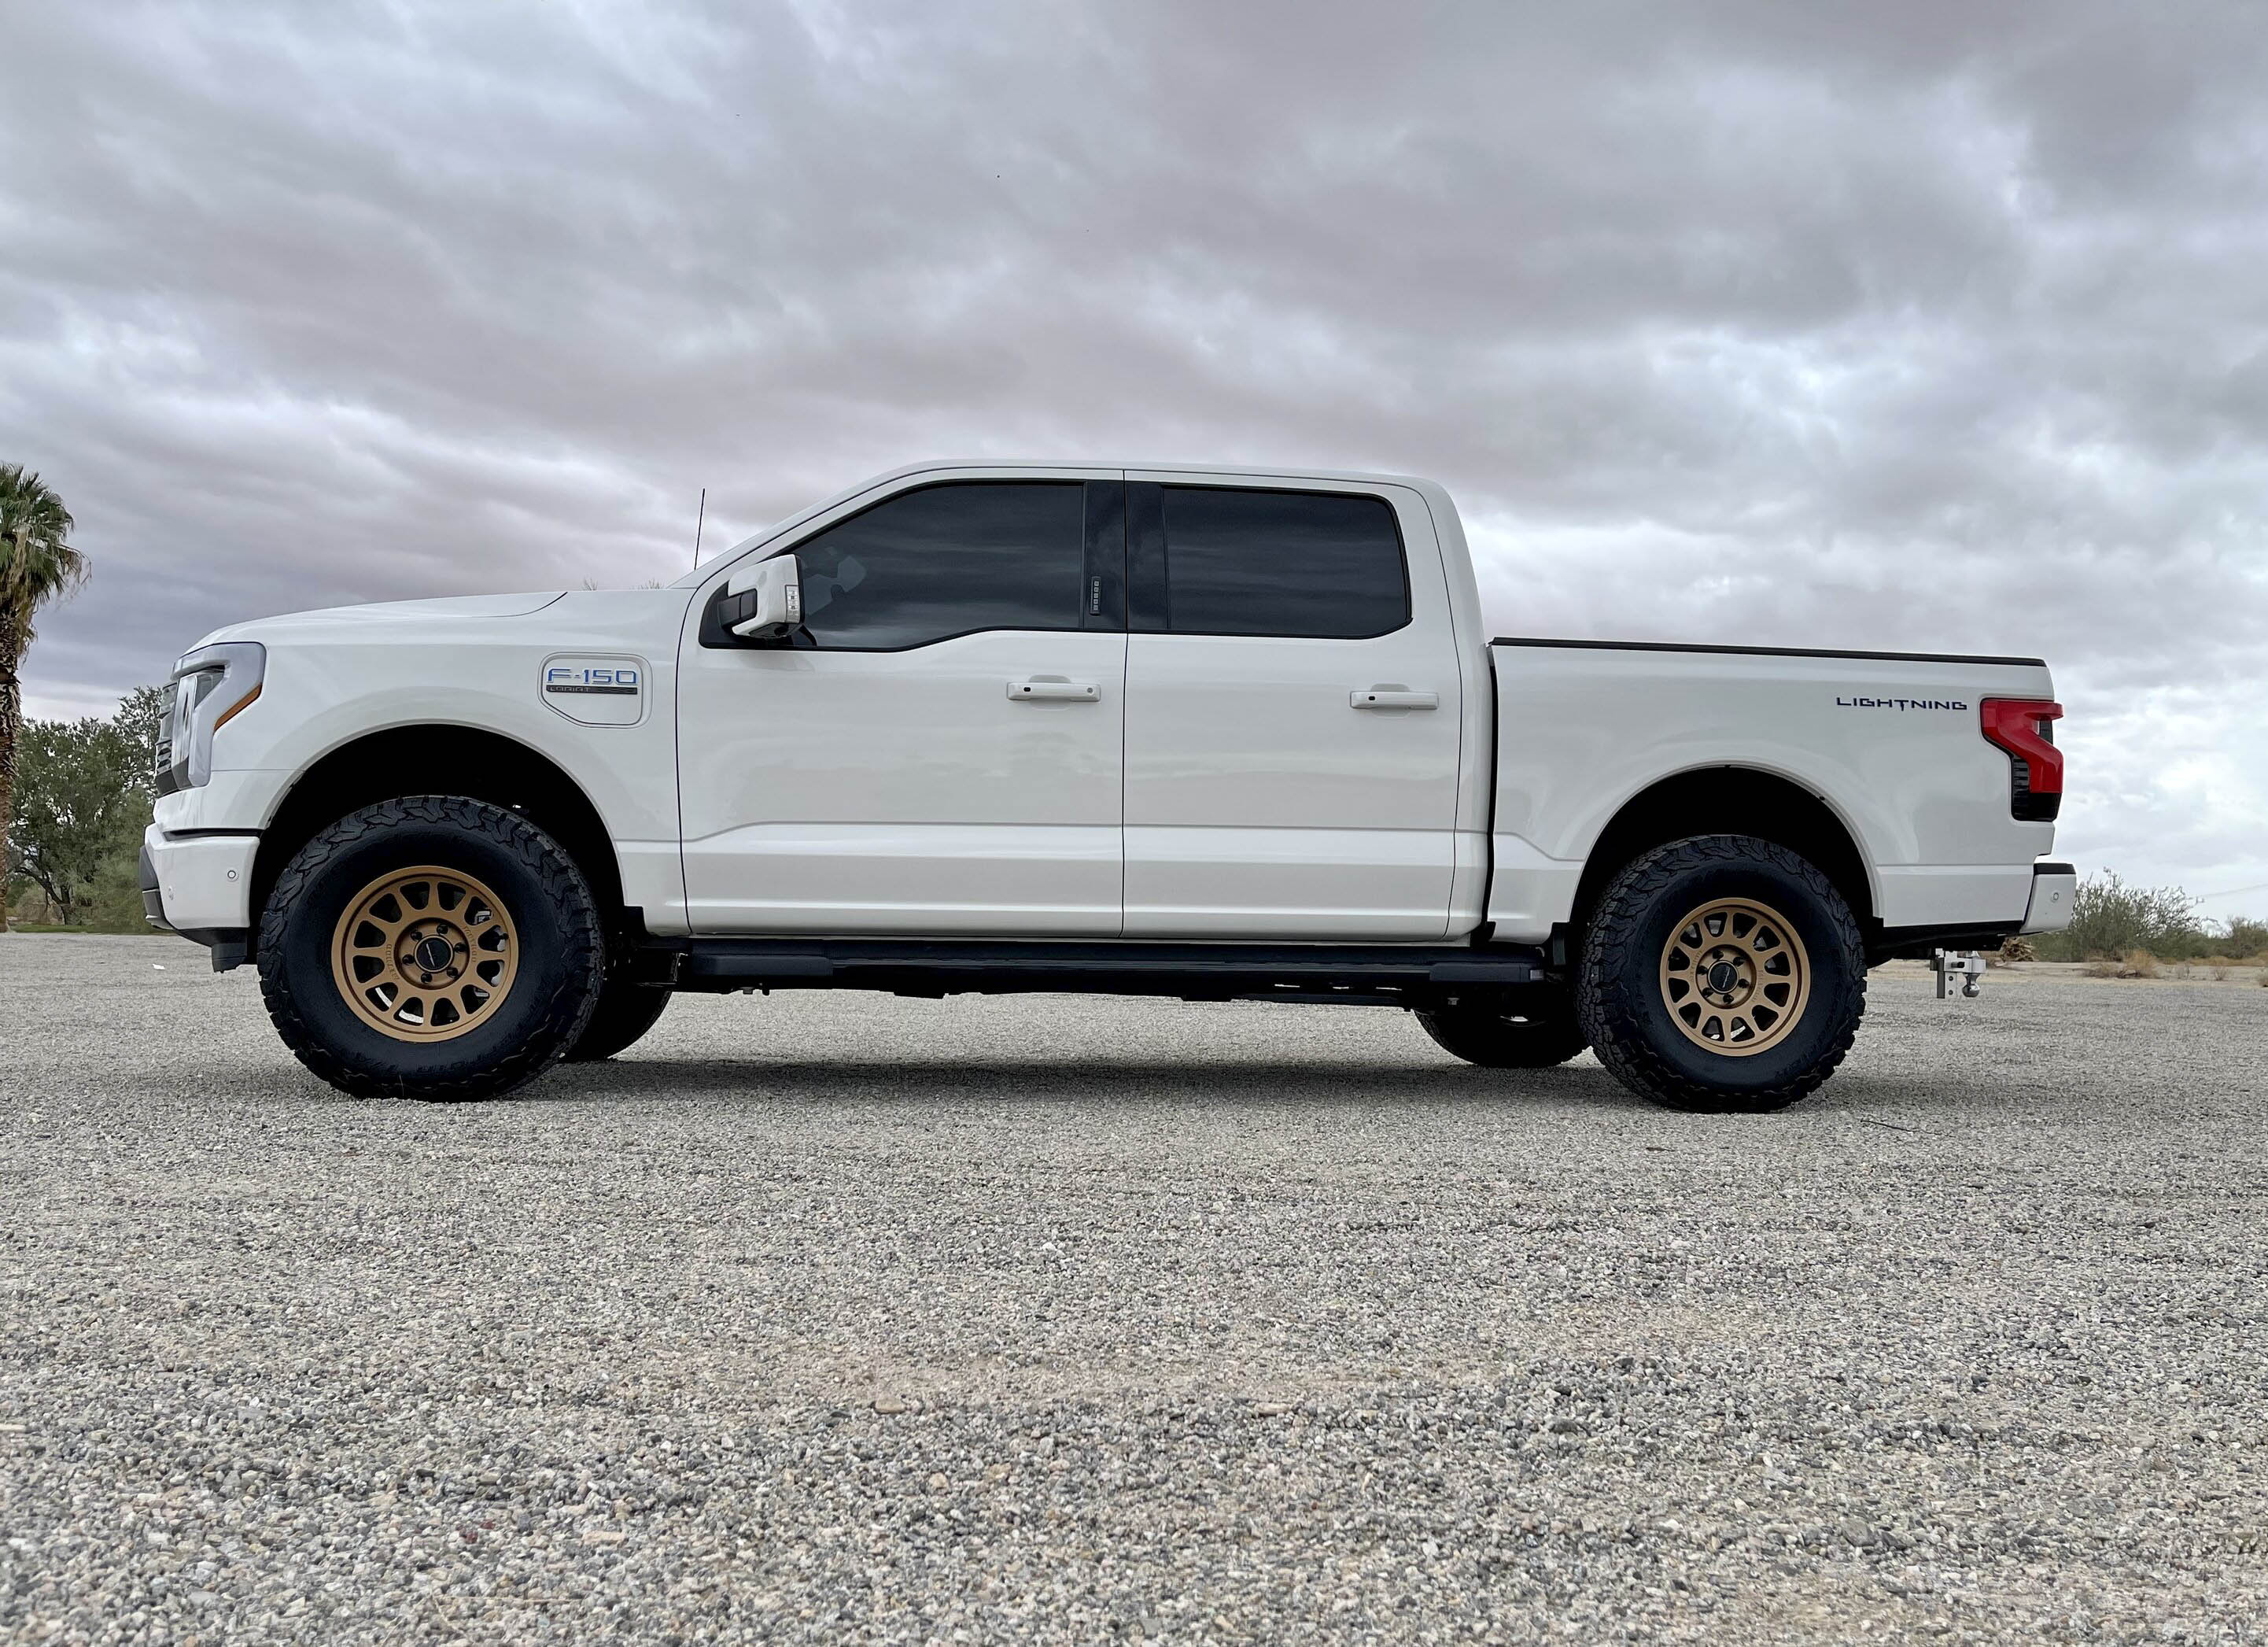 Ford F-150 Lightning Transformation is complete! 17" Method wheels installed + Stage3Motorsports leveling kit on Star White Lightning E7FADD8B-7E42-4184-902C-1ECA30482AAA